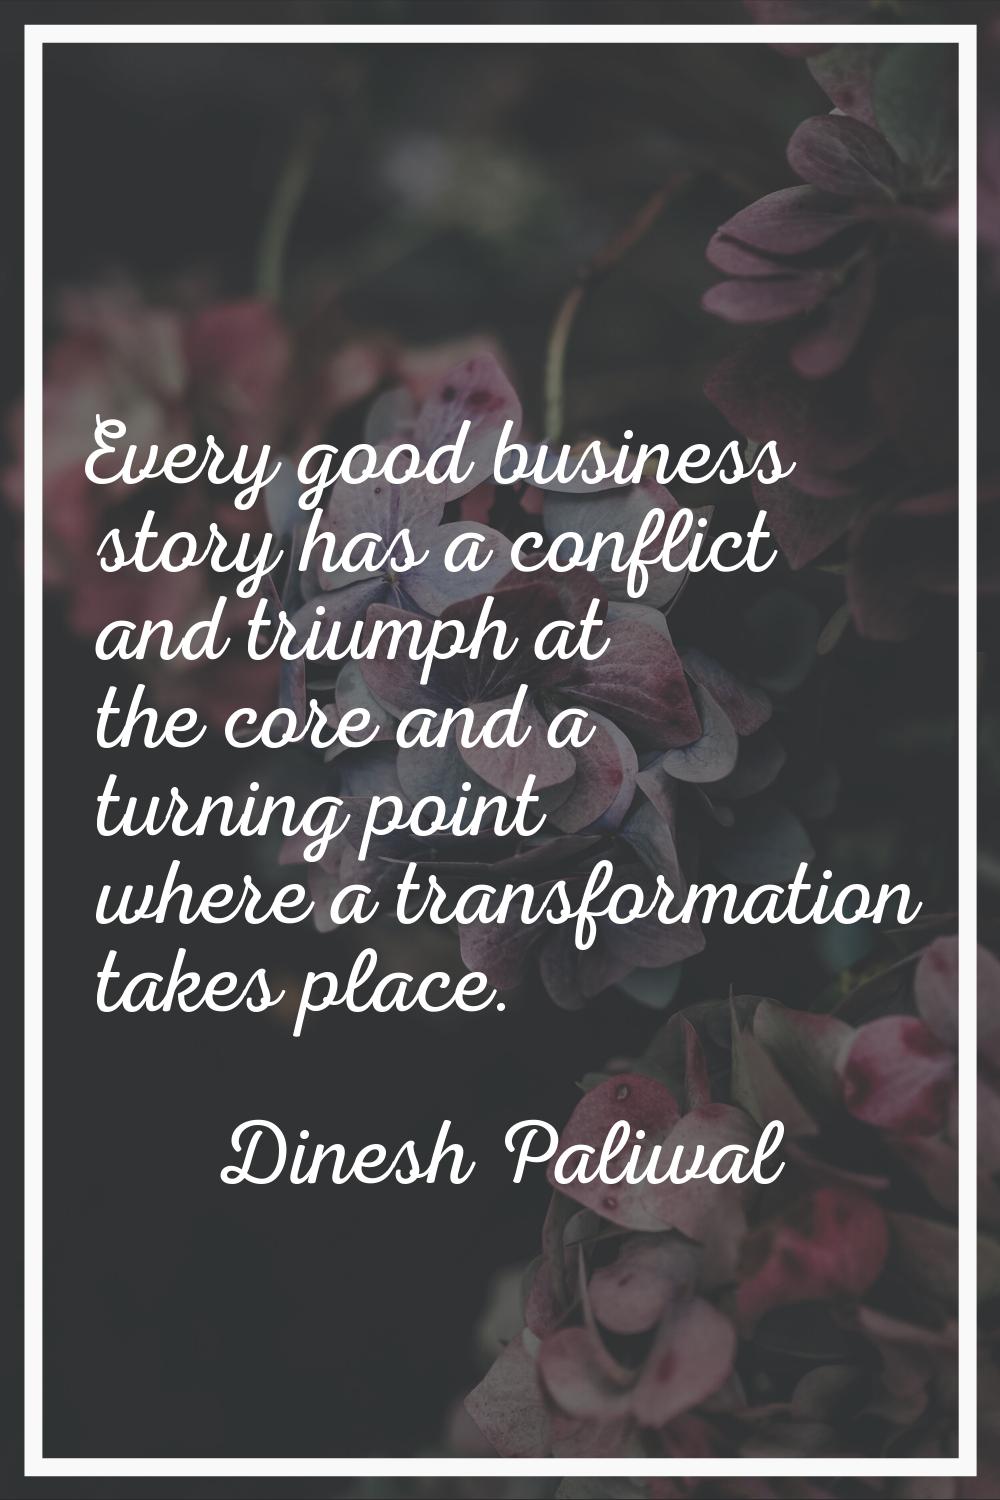 Every good business story has a conflict and triumph at the core and a turning point where a transf